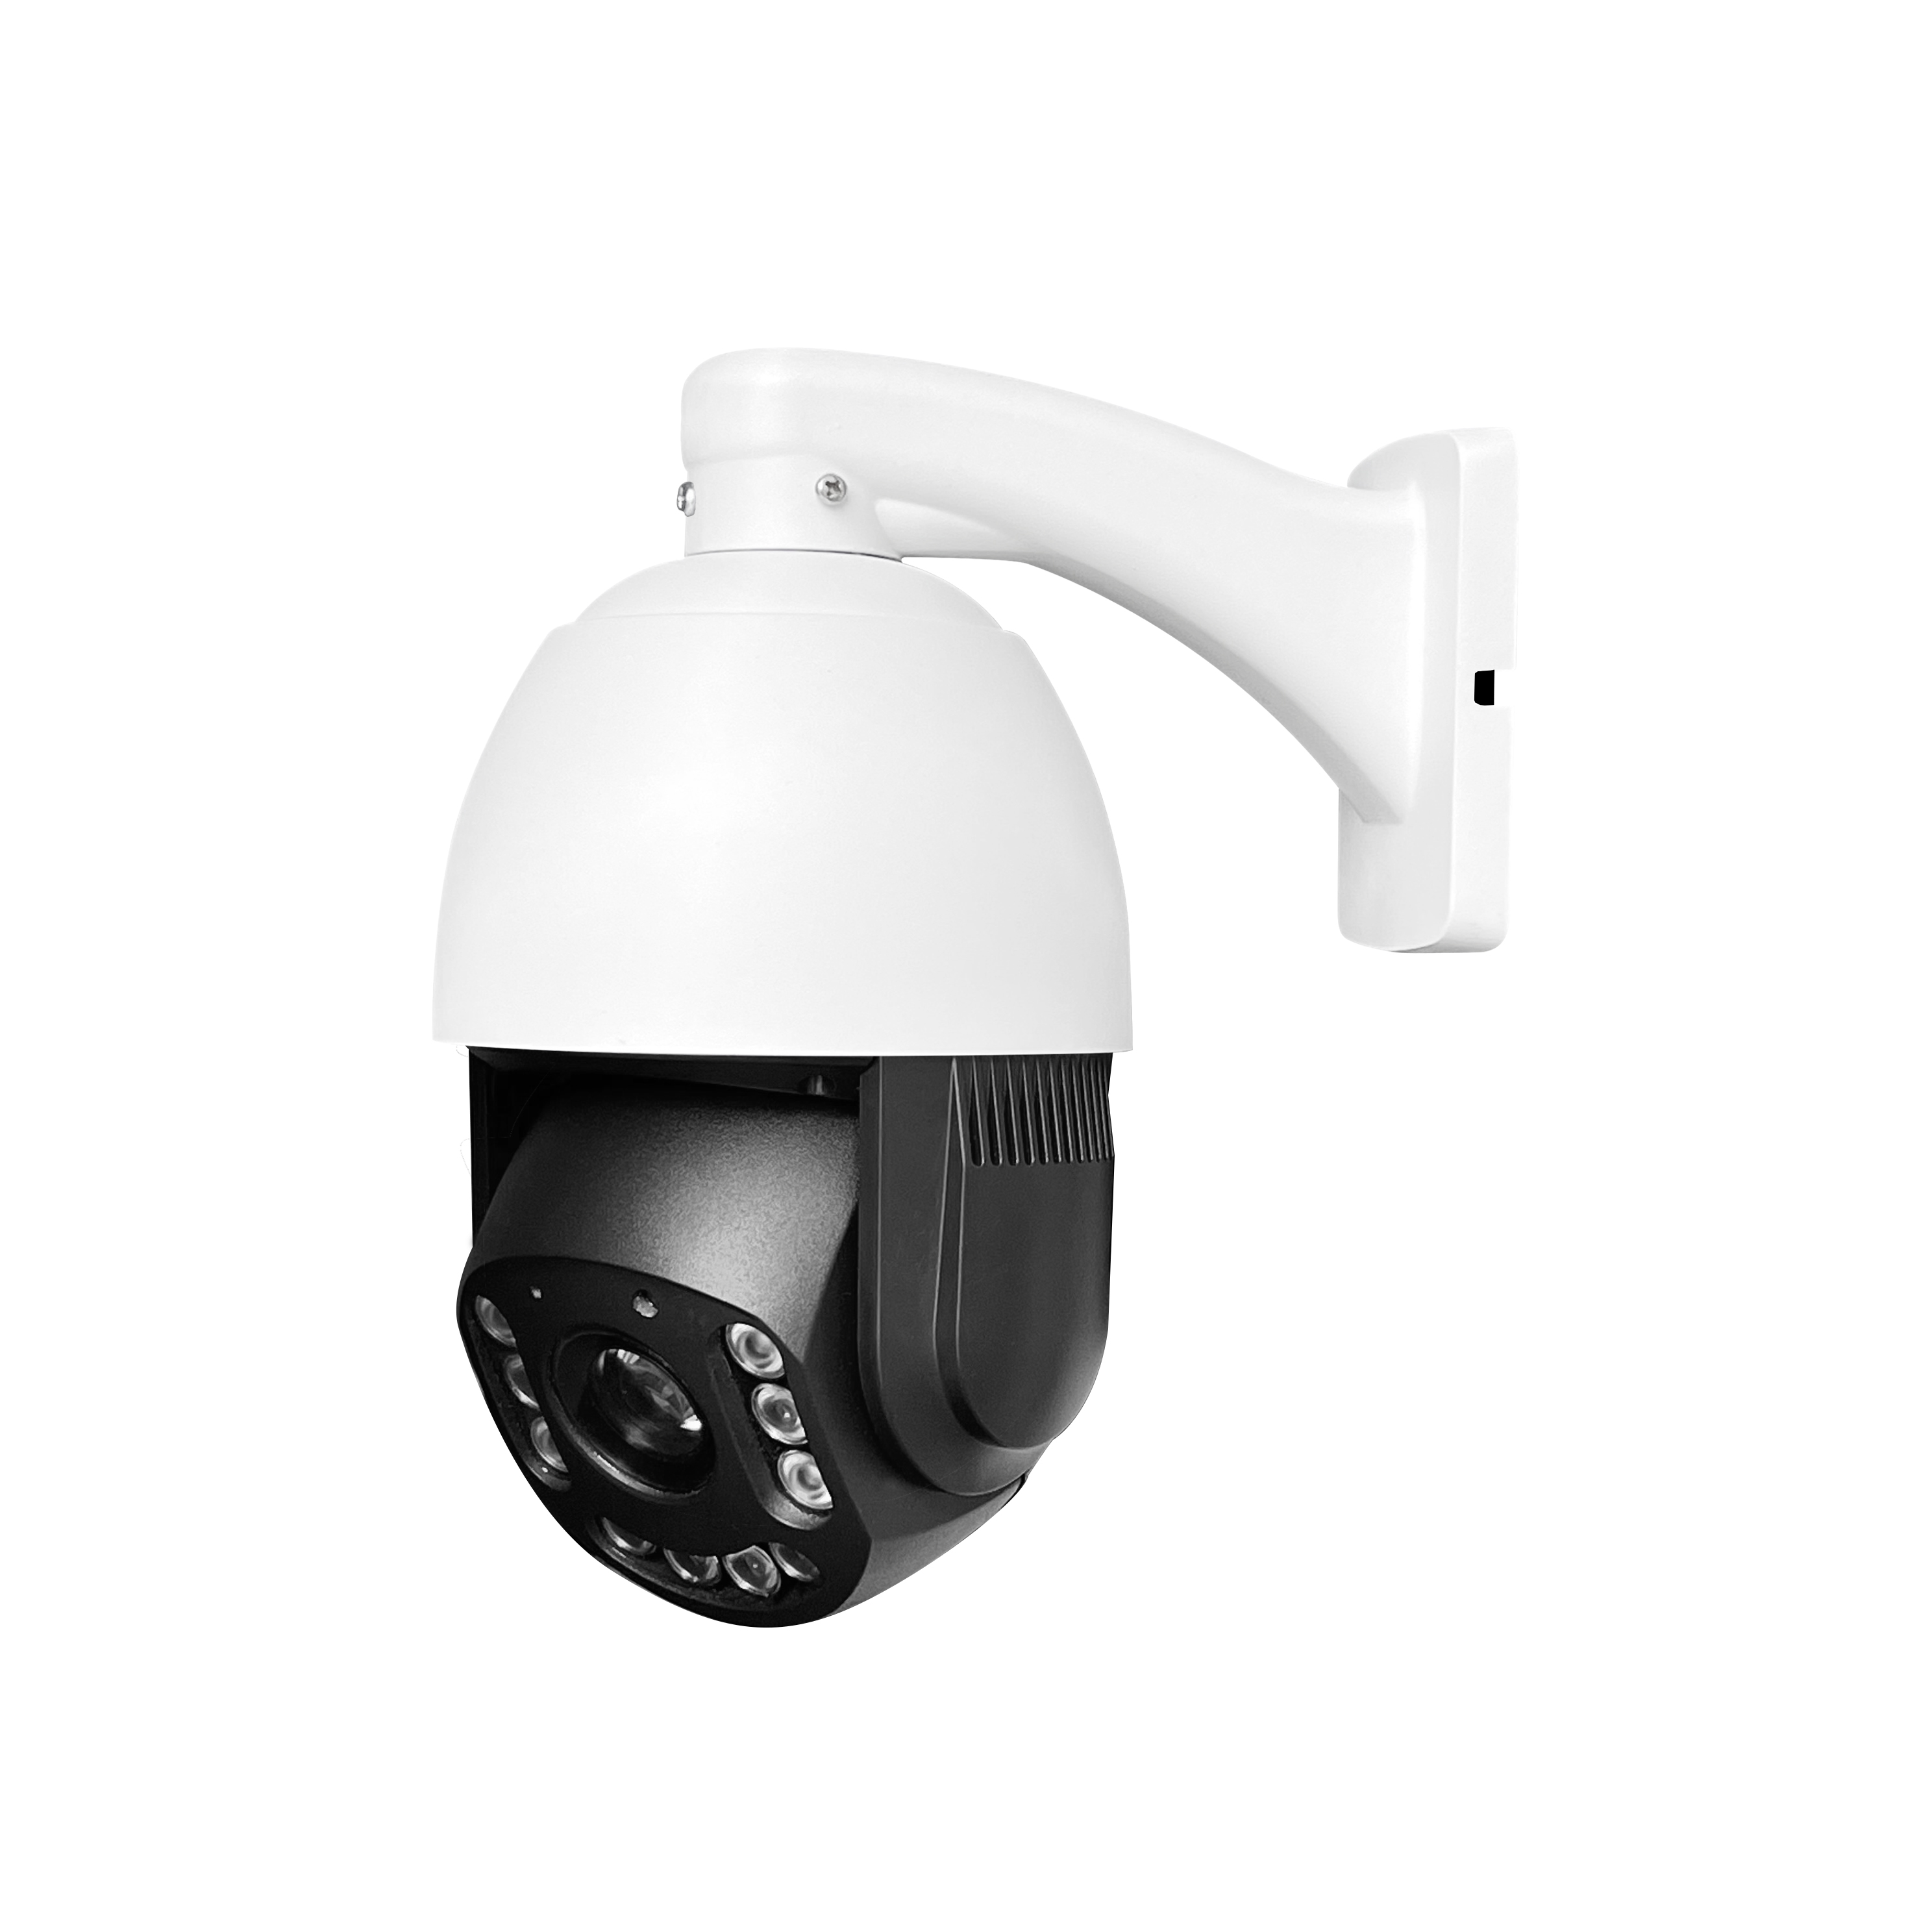 Microseven Open Source 4K/8MP Full Color Night Vision UltraHD PoE+ 20X Optical Zoom Pan Tilt Speed Dome IP Camera, Human & Vehicle Motion Detection & Auto Tracking, Indoor / Outdoor PTZ Camera,WDR, DNR, Day & Night,Sony Starvis CMOS,IP66 Weatherproof, Built-in 256GB SDcard Slot, Two-Way Audio, Auto Cruise,ONVIF, Web GUI & Apps, VMS (Video Management System), Free 24Hr Cloud Storage + Broadcasting on YouTube,Facebook & Microseven.tv